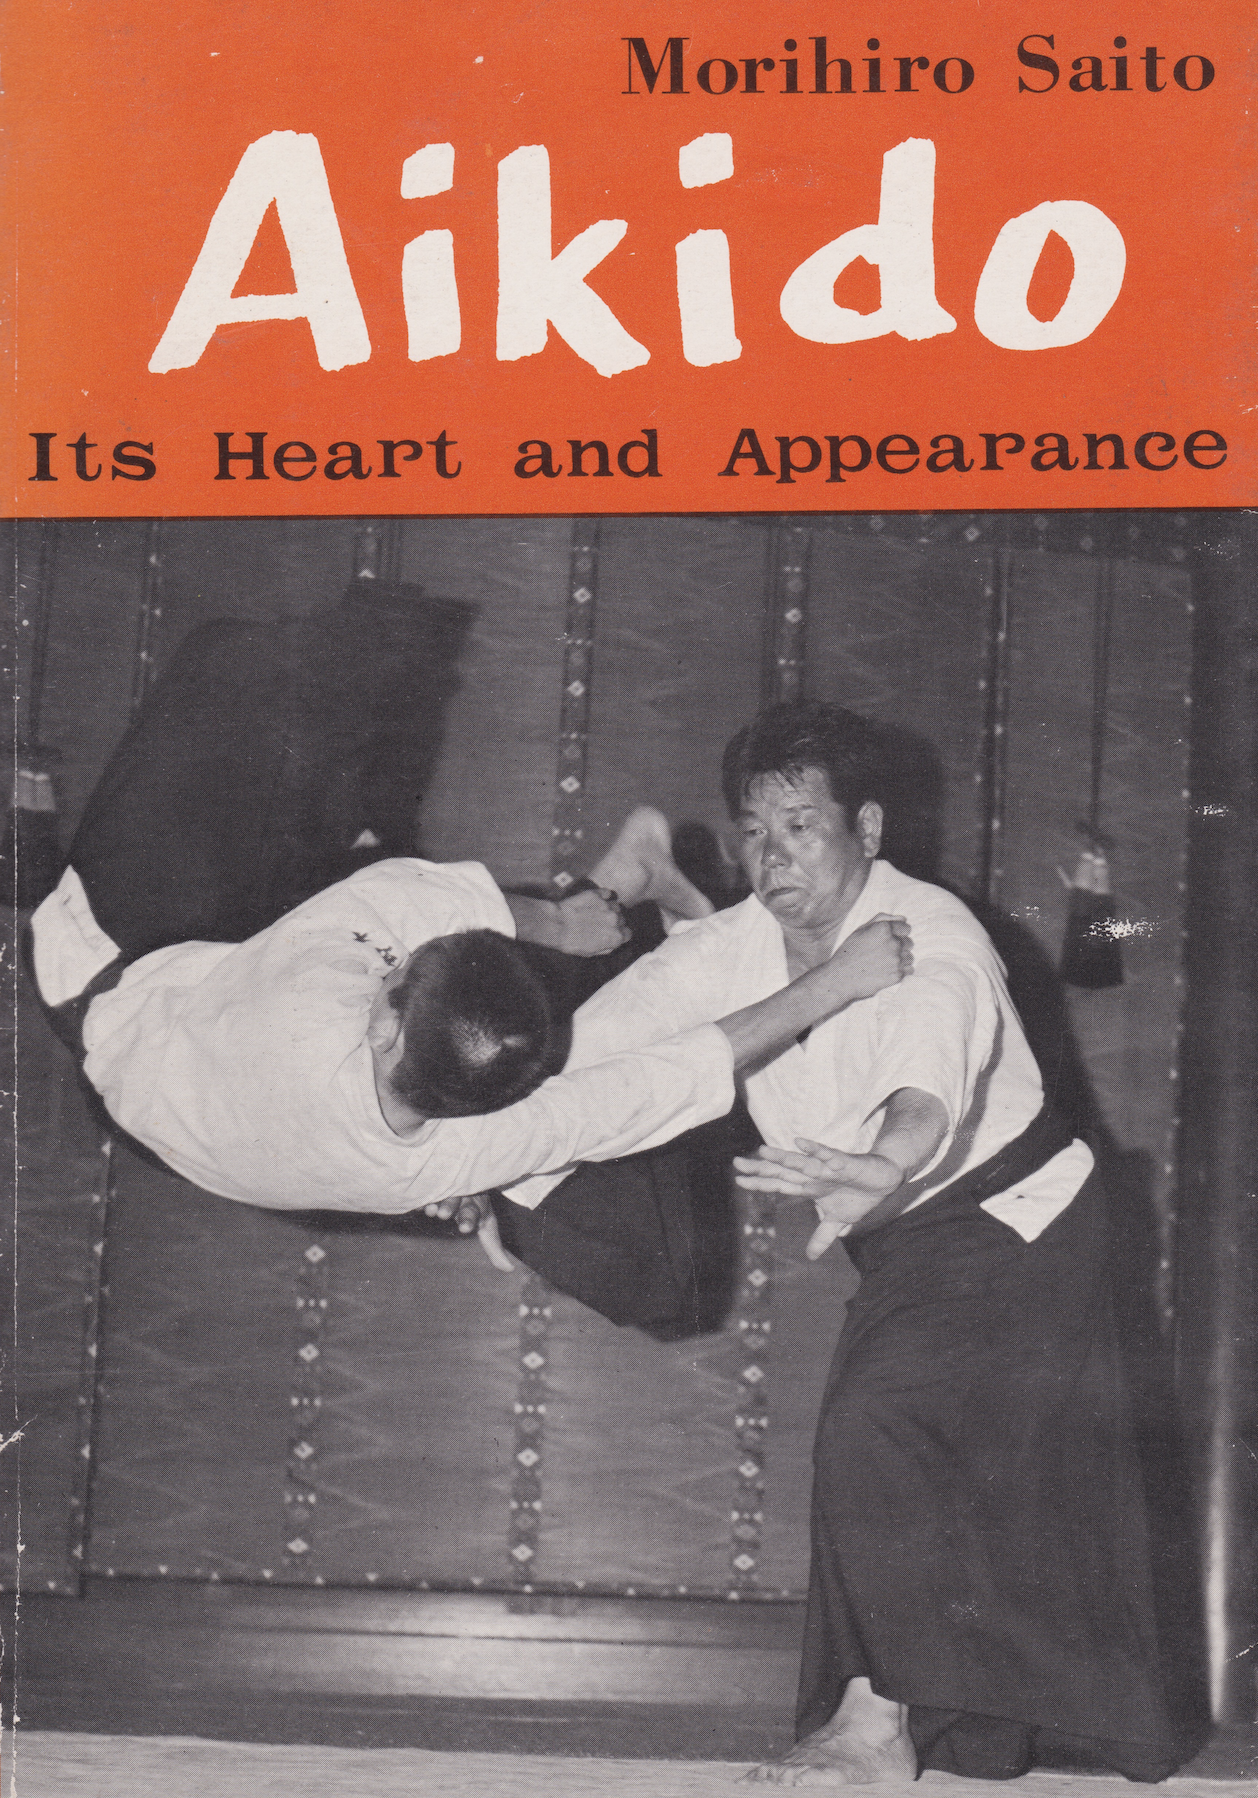 Aikido: Its Heart and Appearance Book by Morihiro Saito (Orange Cover) (Preowned)